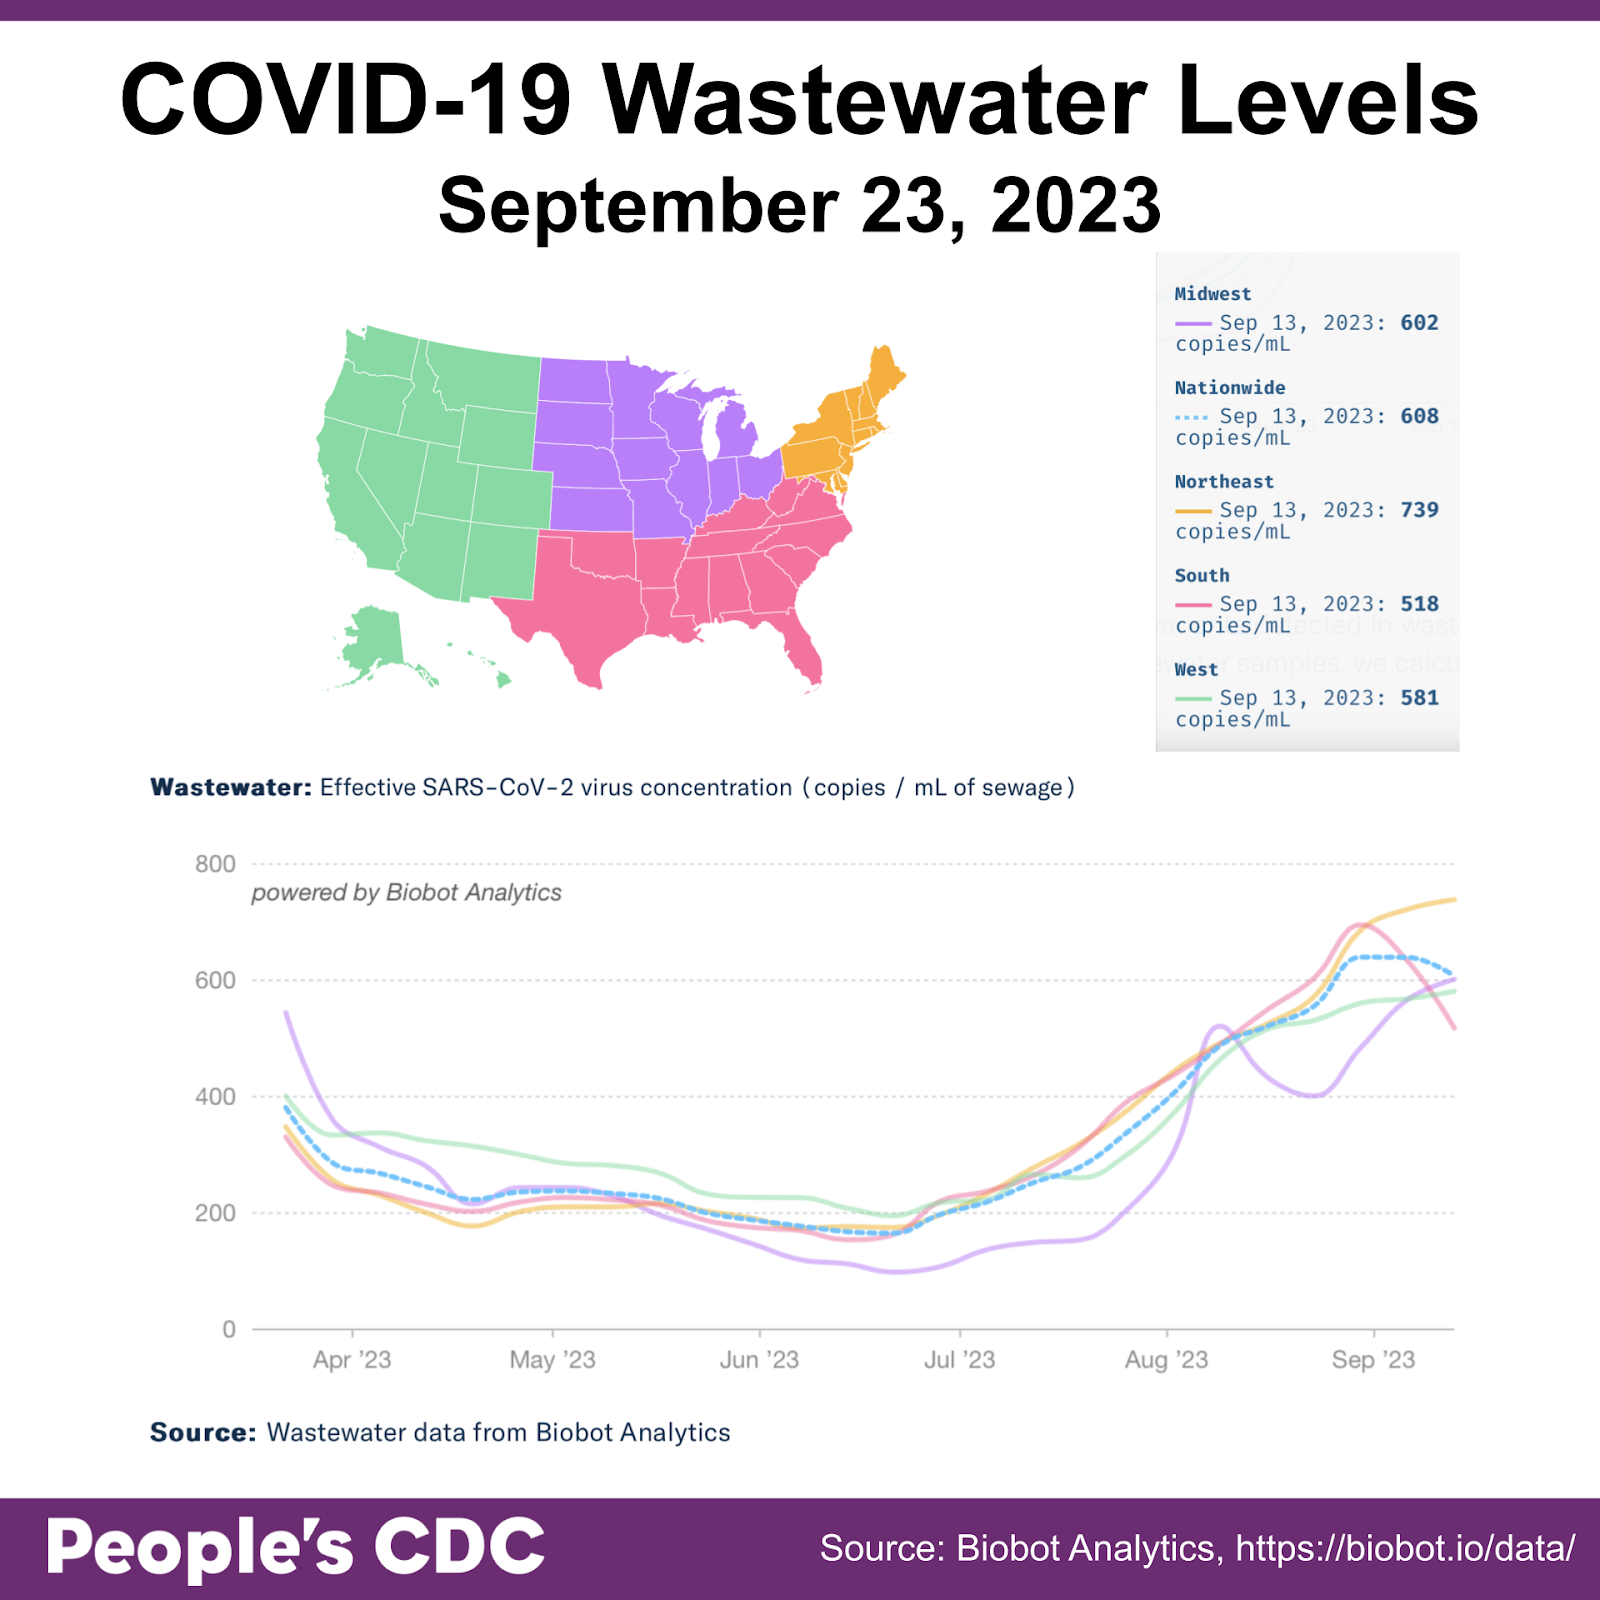 Title reads “COVID-19 Wastewater Levels September 23, 2023.” A map of the United States in the upper left corner serves as key. The west is green, Midwest is purple, South is pink, and Northeast is orange. A line graph on the bottom is titled “Wastewater: Effective SARS-CoV-2 virus concentration (copies/mL of sewage),” from Apr 2023 through Sept 2023. Using Sep 13th data, the line graph shows X-axis labels Apr ‘23 to Sept ‘23 with regional virus concentrations showing a decrease in all regions from April to mid-June, but rising from mid June to August nationwide. All regions show an increased trend as of 9/13 reported data, except for the South which shows a downward trend. A key on the upper right states concentration as of September 13, 2023: 608 copies / mL (Nationwide), 602 copies / mL (Midwest), 739 copies / mL (Northeast), 518 copies / mL (South), and 581 copies / mL (West).